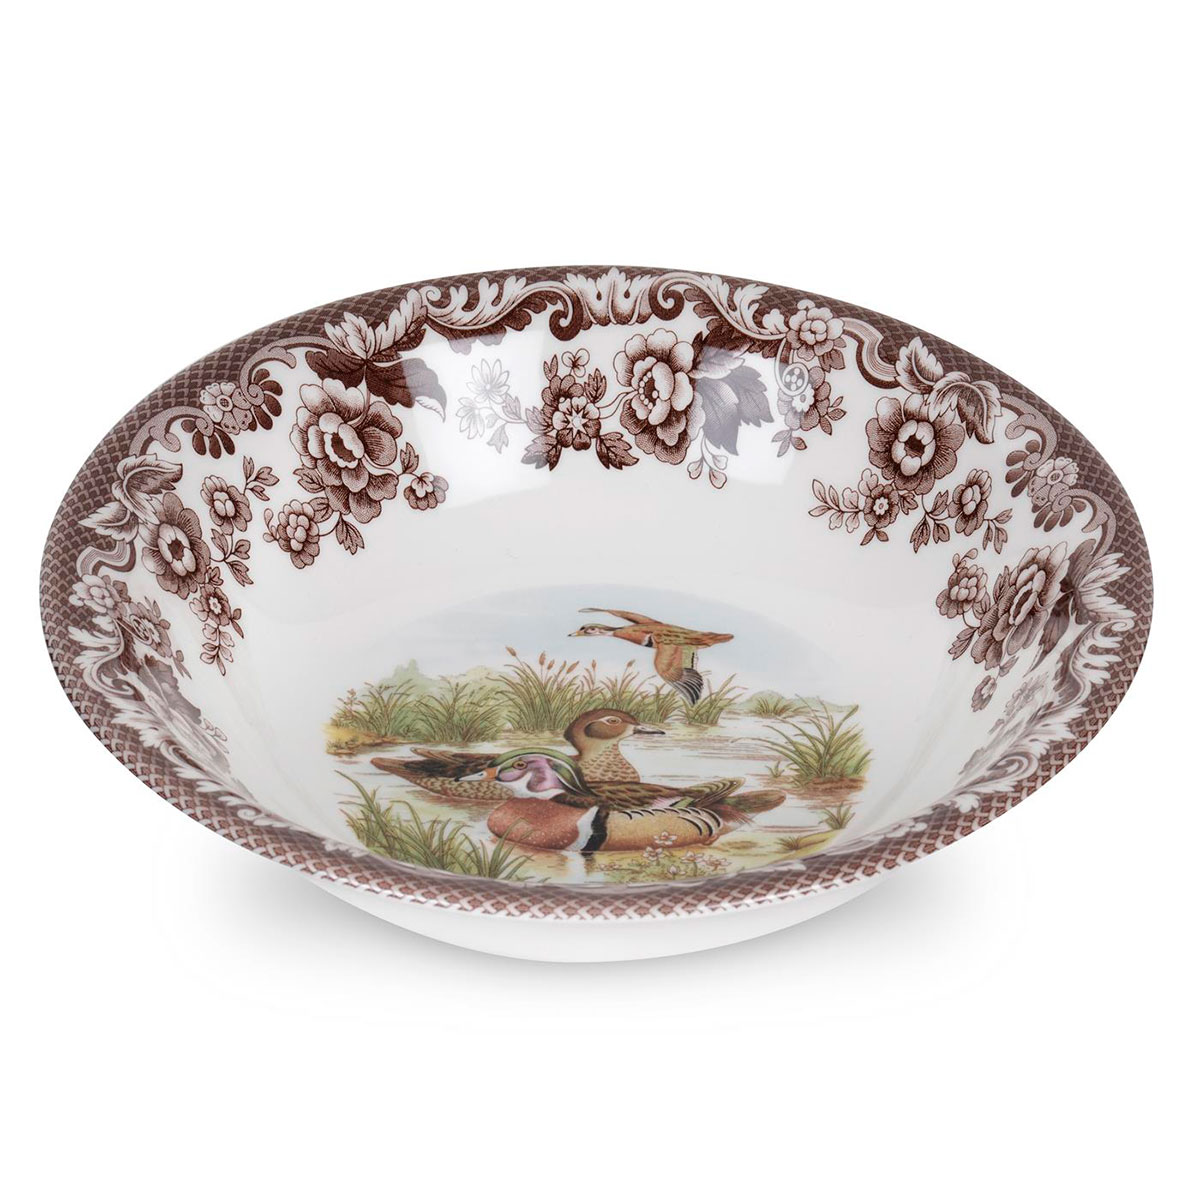 Spode Woodland Ascot Cereal Bowl, Wood Duck